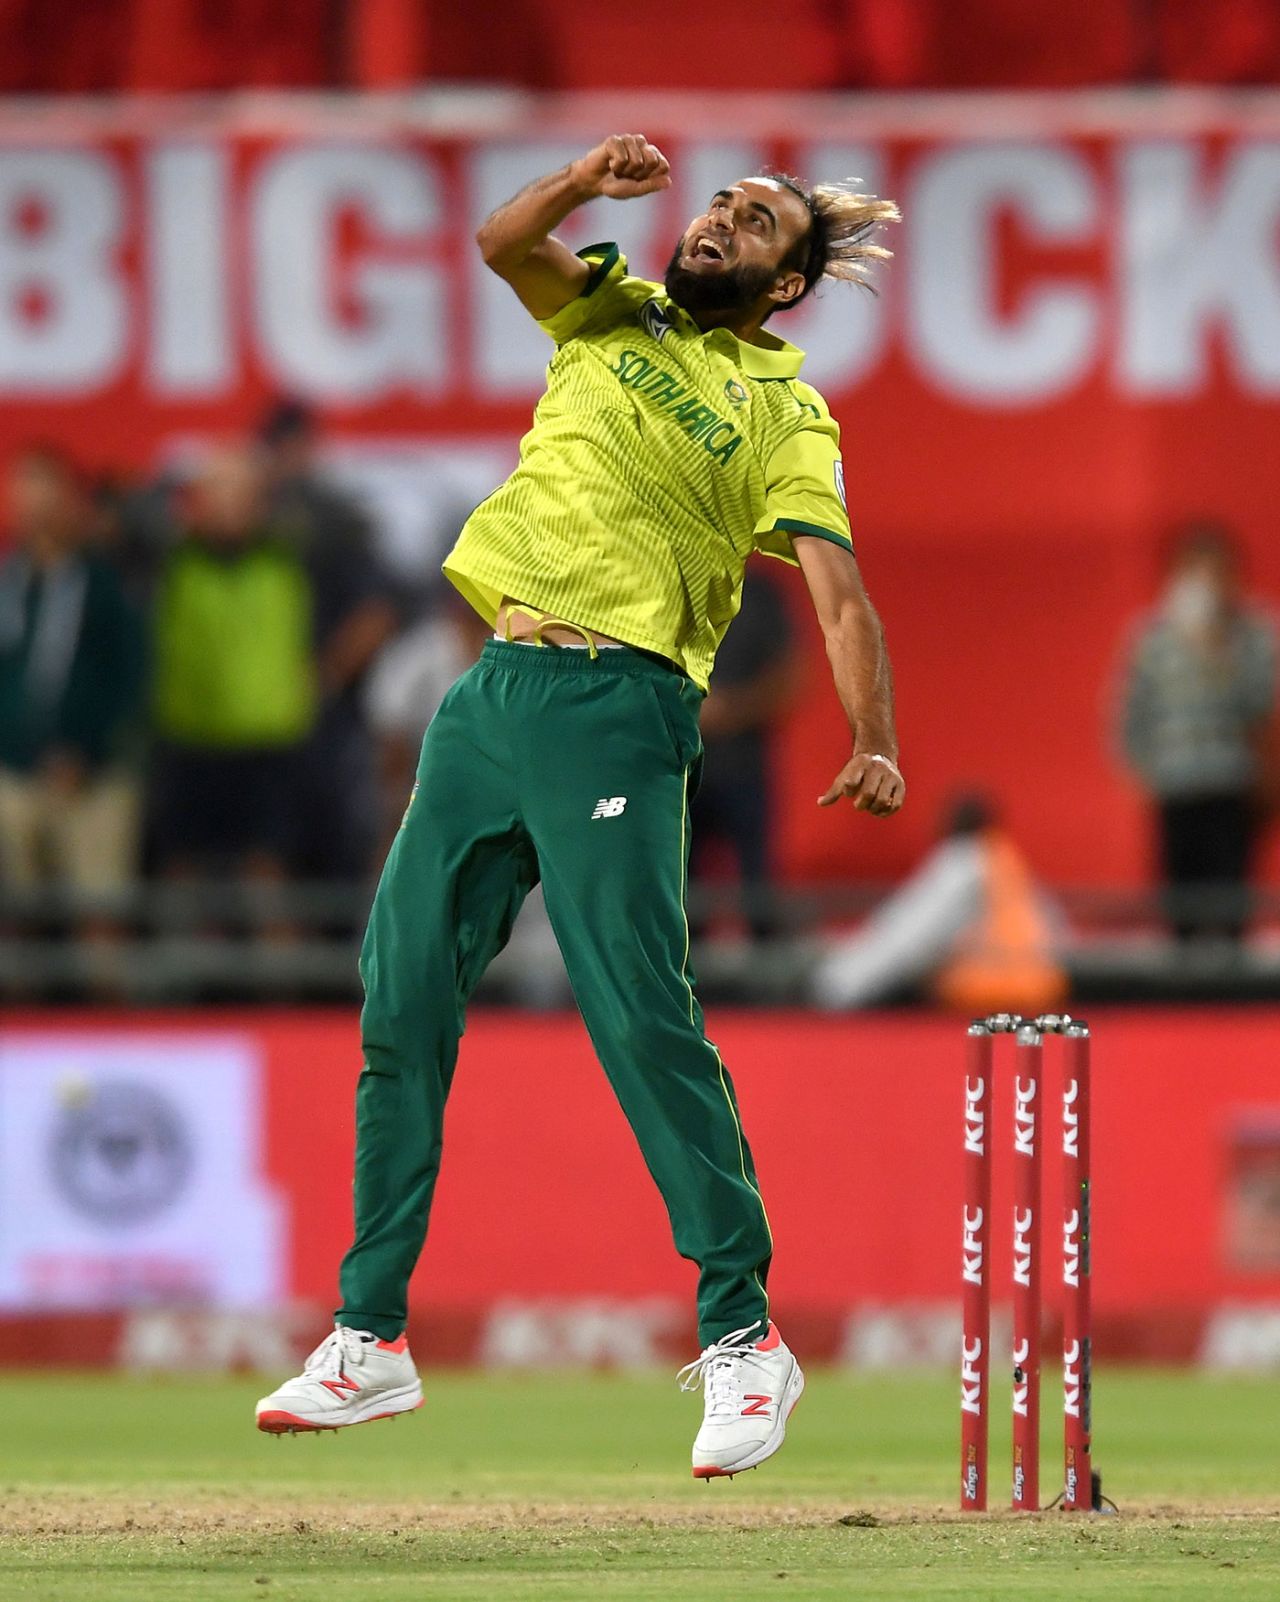 Imran Tahir secured the Super Over for South Africa, South Africa v Sri Lanka, 1st T20I, Cape Town, March 19, 2019